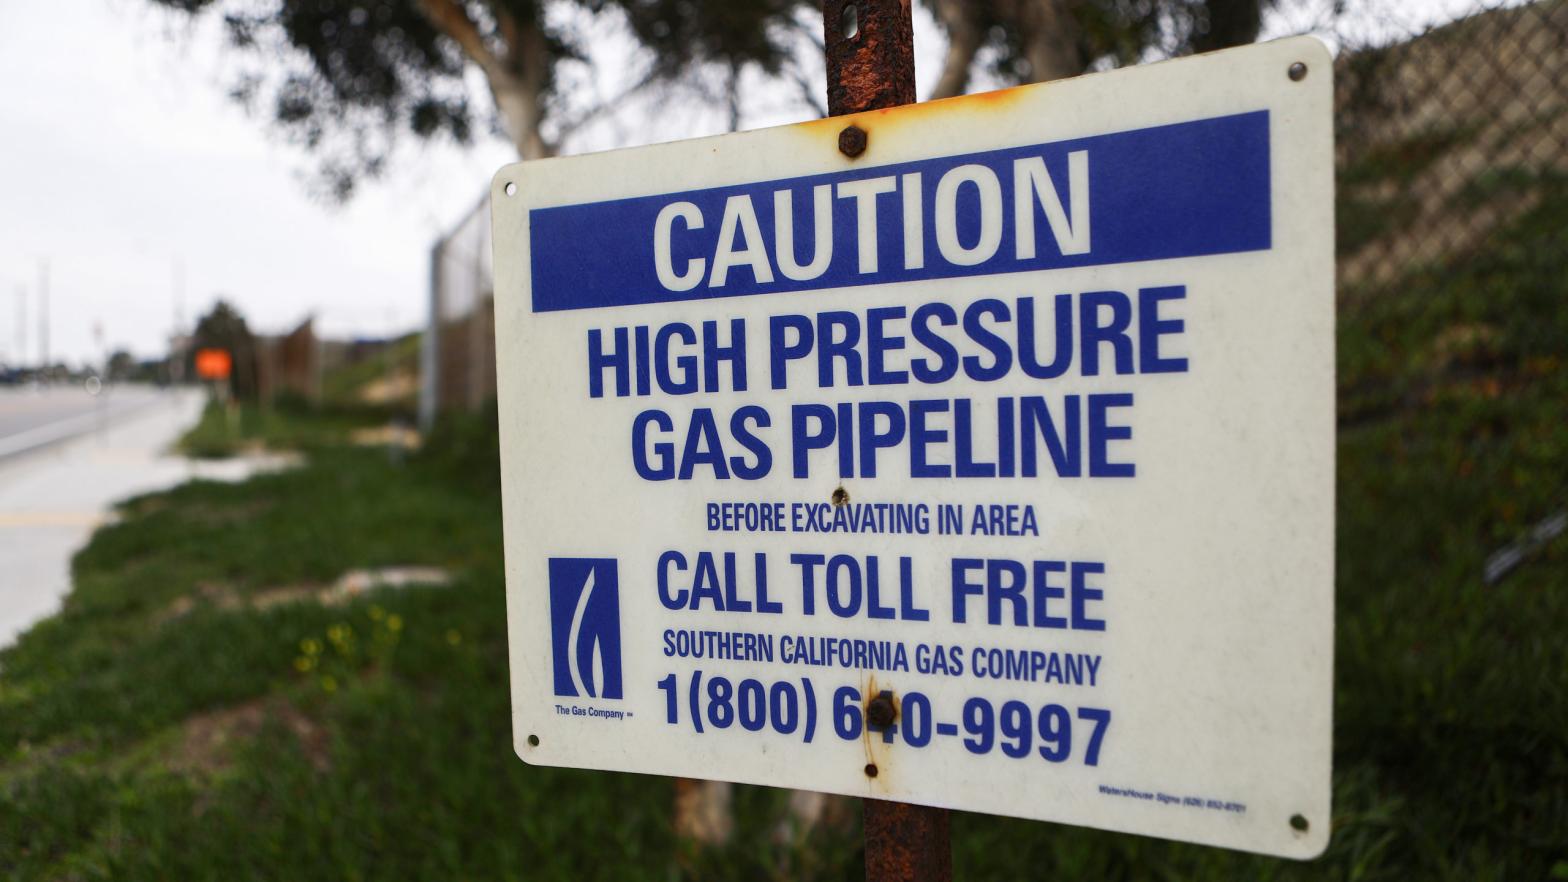 A warning sign for a gas pipeline is mounted near the Scattergood Generating Station on February 12, 2019 in El Segundo, California. (Photo: Mario Tama, Getty Images)